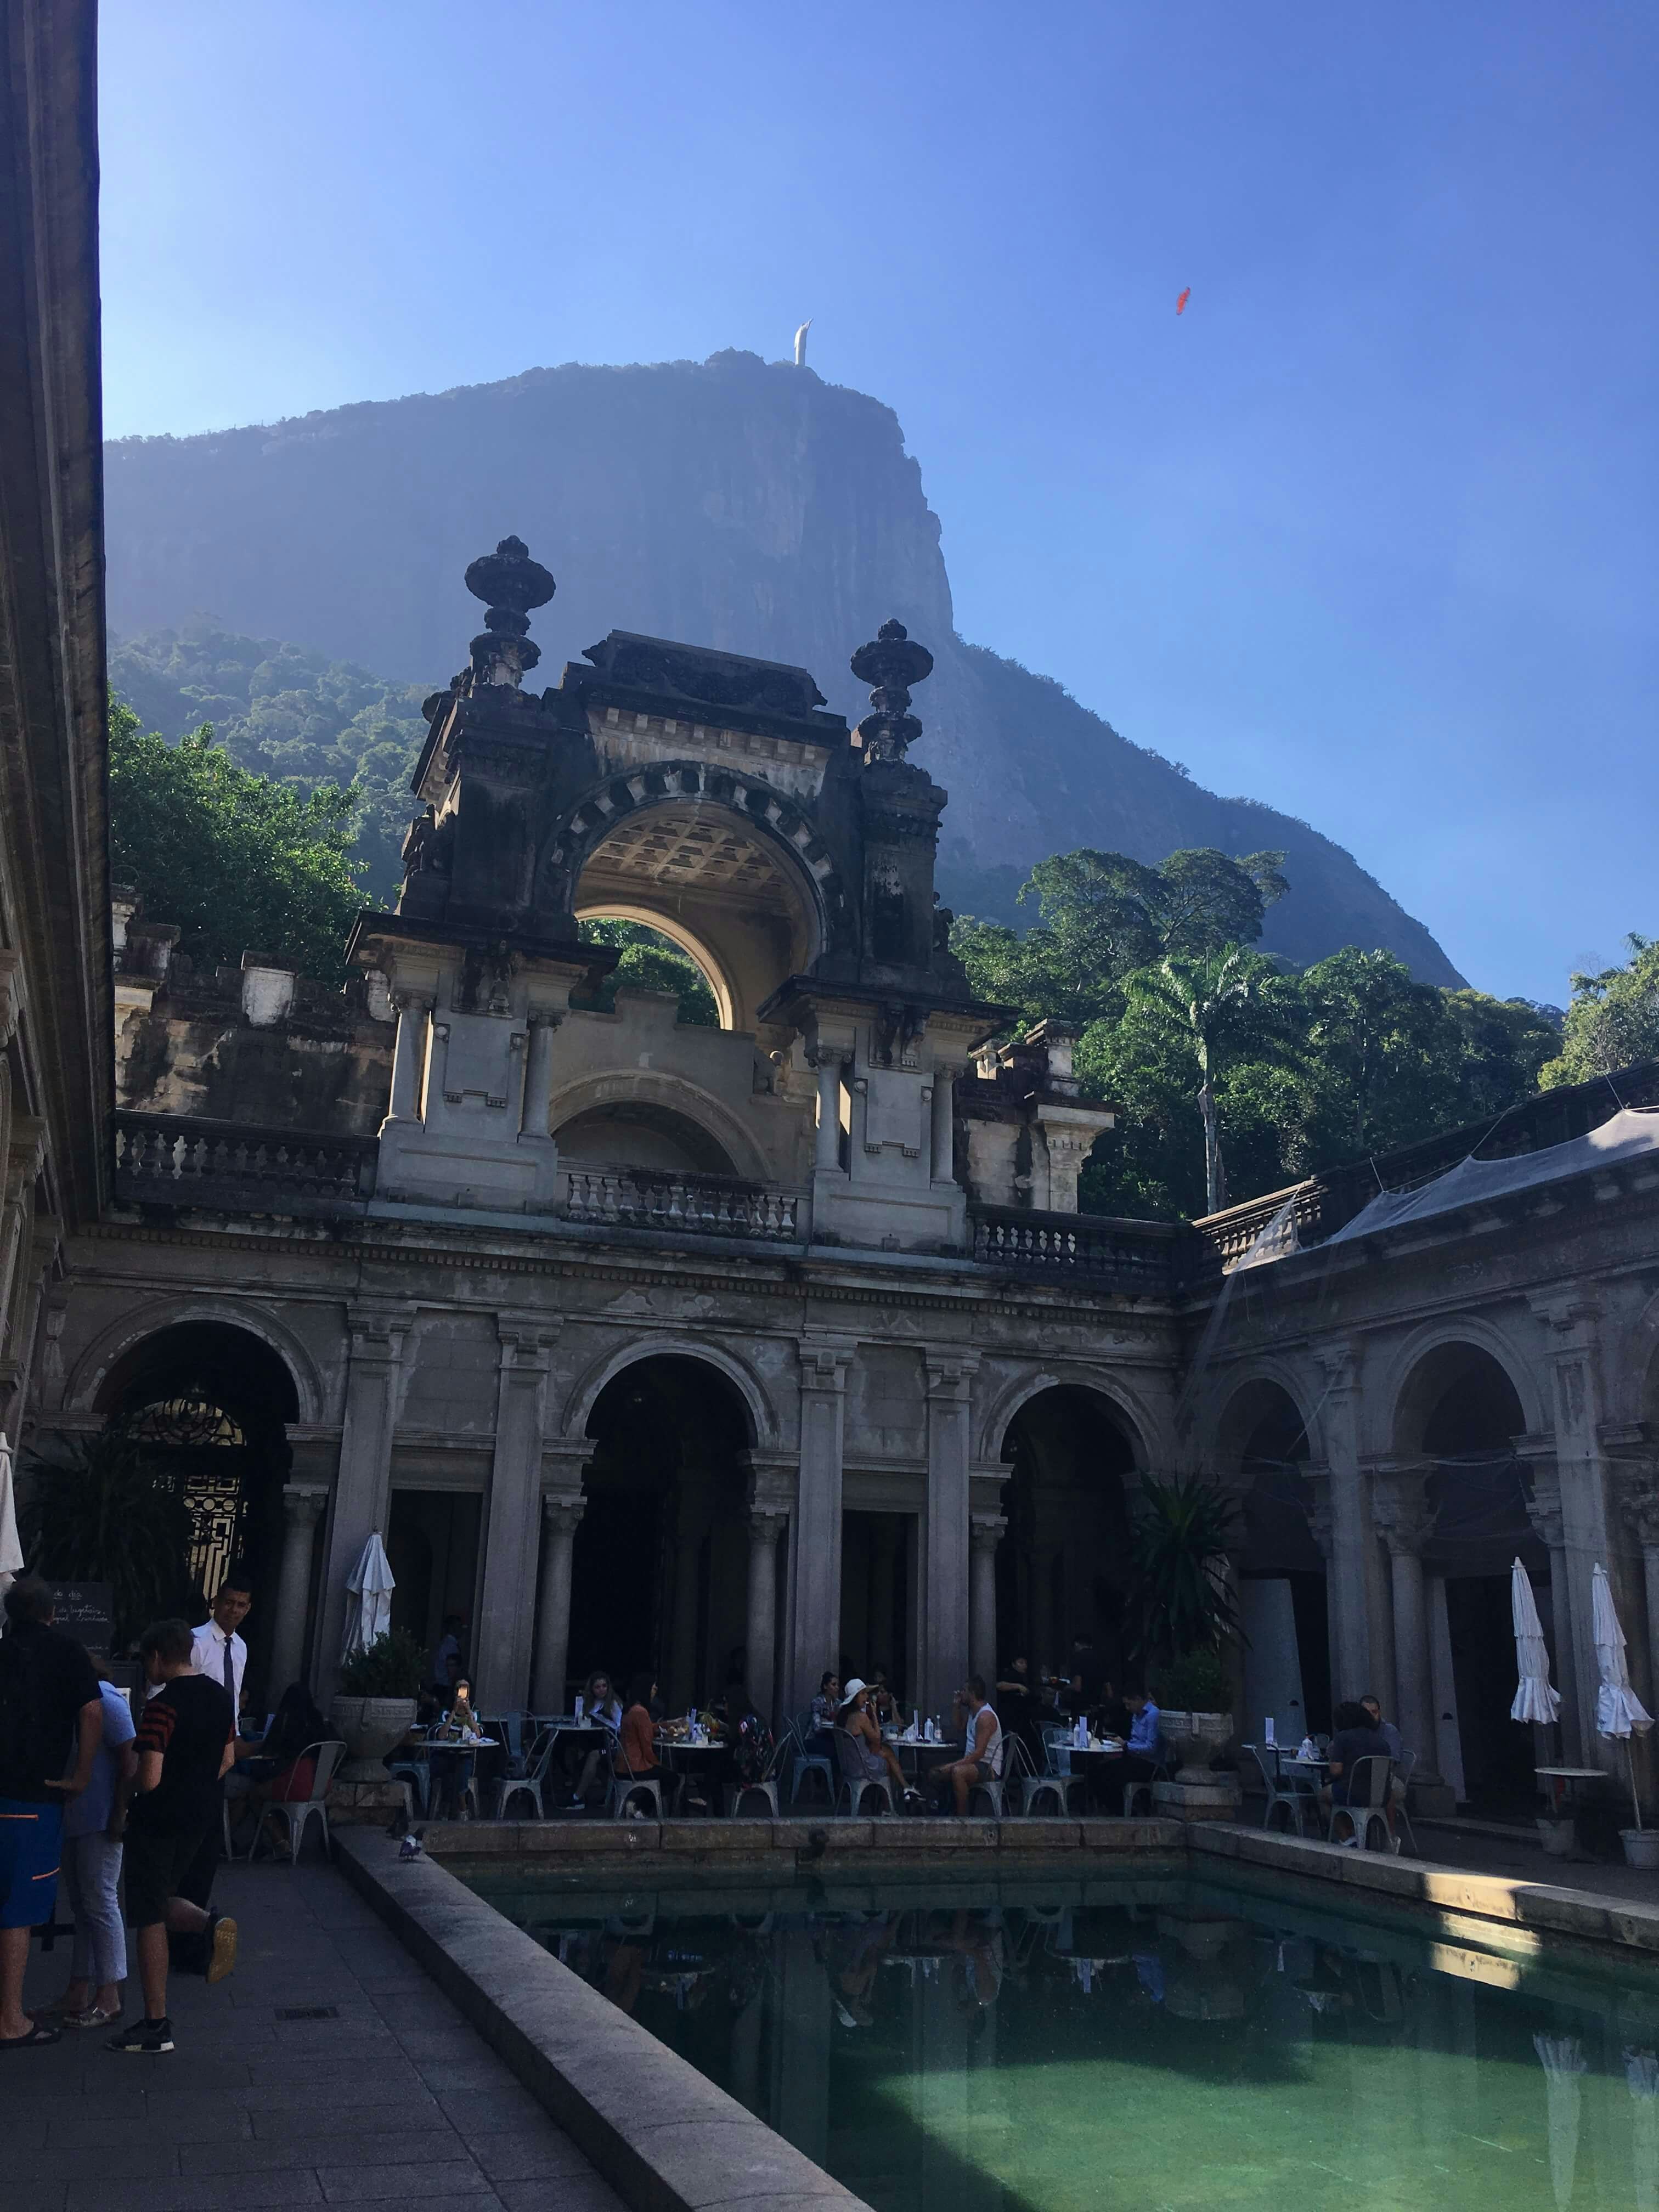 A small pool in the middle of a stone mansion with tables and chair. In the background, Corcovado mountain stands with a statue of Christ the Redeemer at the very top